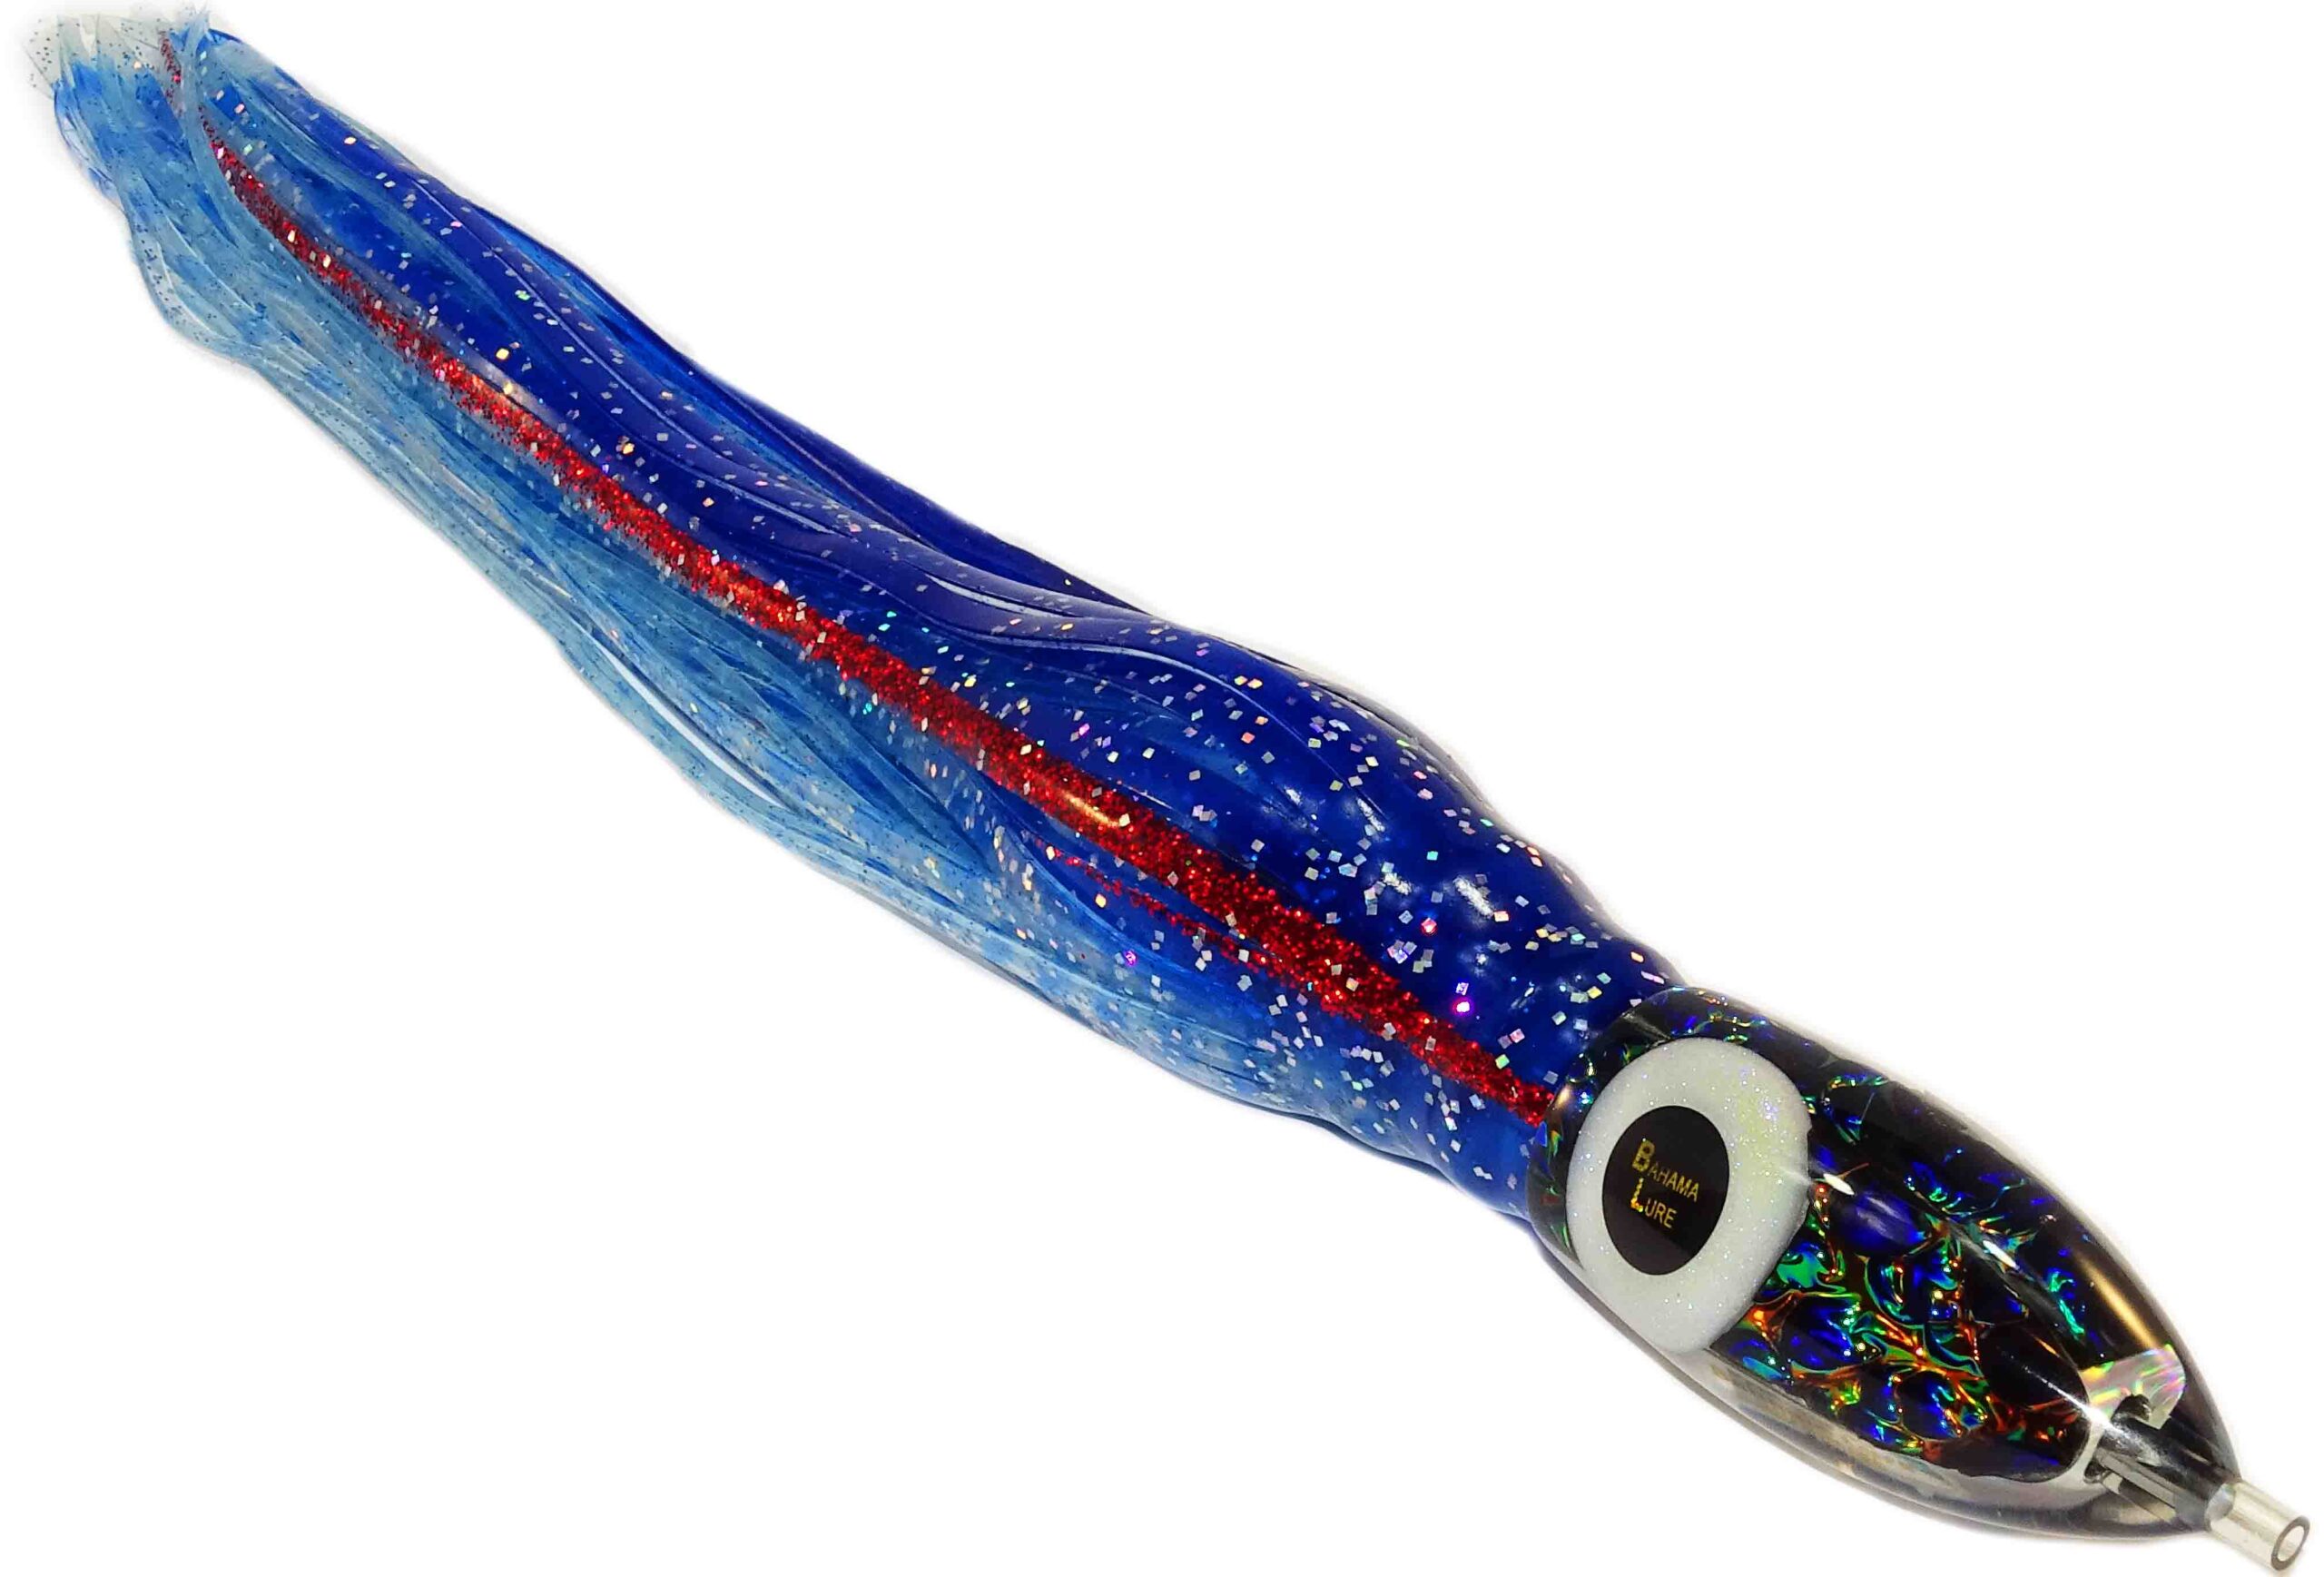 Bahama Lure - Proteus 30 Series - Blue Dragon Hide - Itty Billy